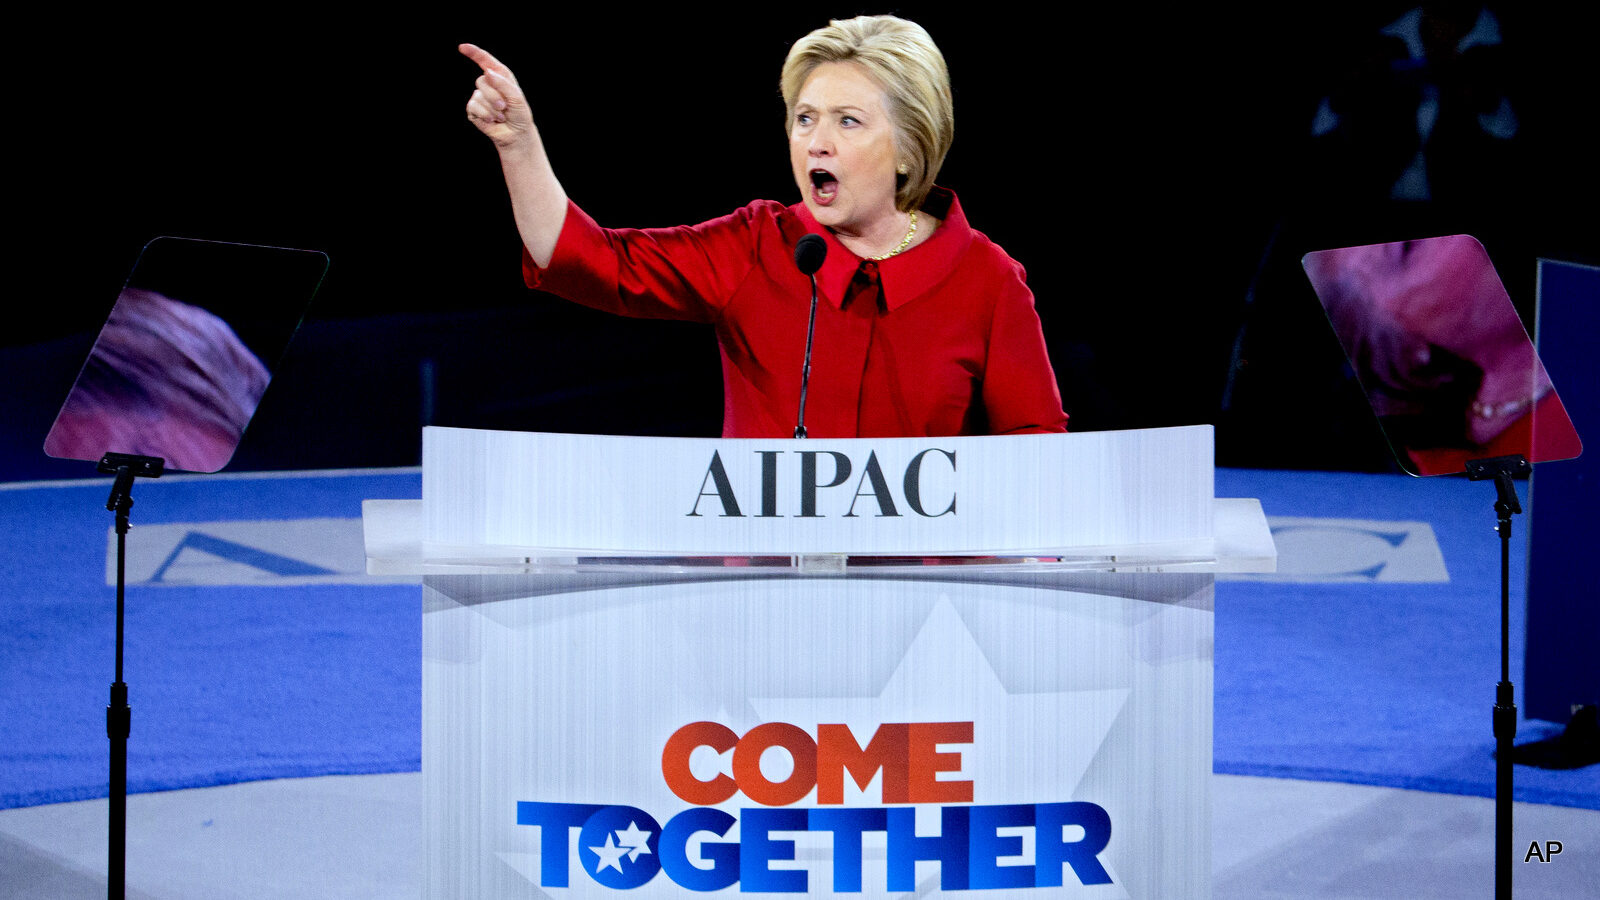 Democratic presidential candidate Hillary Clinton speaks at the 2016 American Israel Public Affairs Committee (AIPAC) Policy Conference, March 21, 2016, at the Verizon Center in Washington.